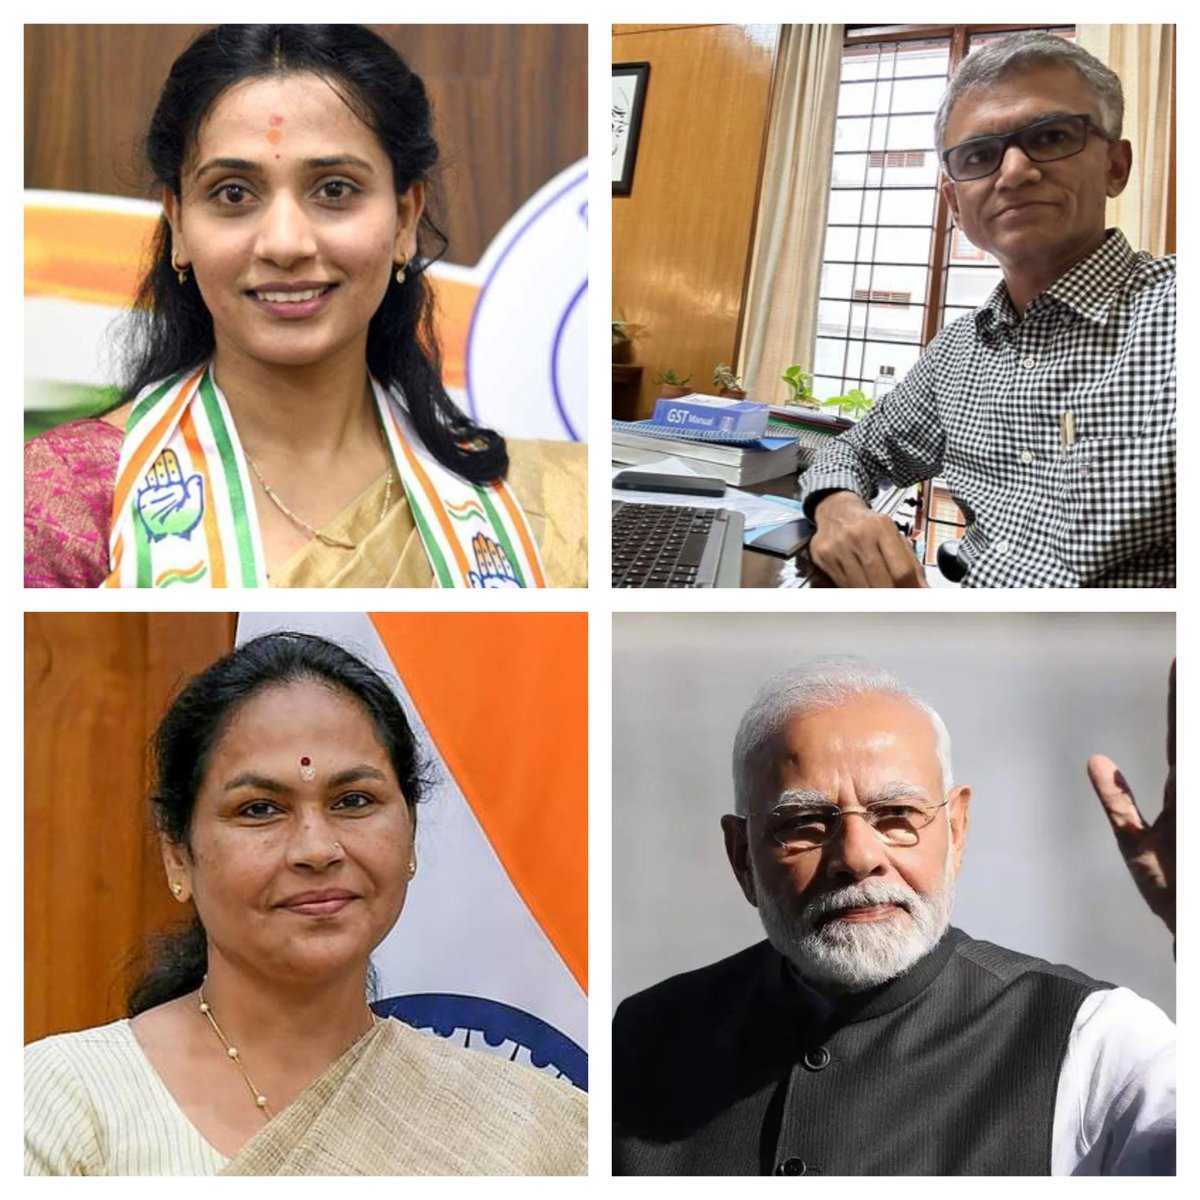 KARNATAKA POLITICAL ANALYSIS:

#BengaluruNorth: The BJP Highcommand has announced #ShobhaKarandlaje as Bengaluru North candidate; TIME FOR CONG to Play its CARD RIGHTLY.!

◼️WHO SHUD BE FROM THE CONGRESS?

#ANALYSIS:

📌It Should be Either KrishneByreGowda or Kusuma